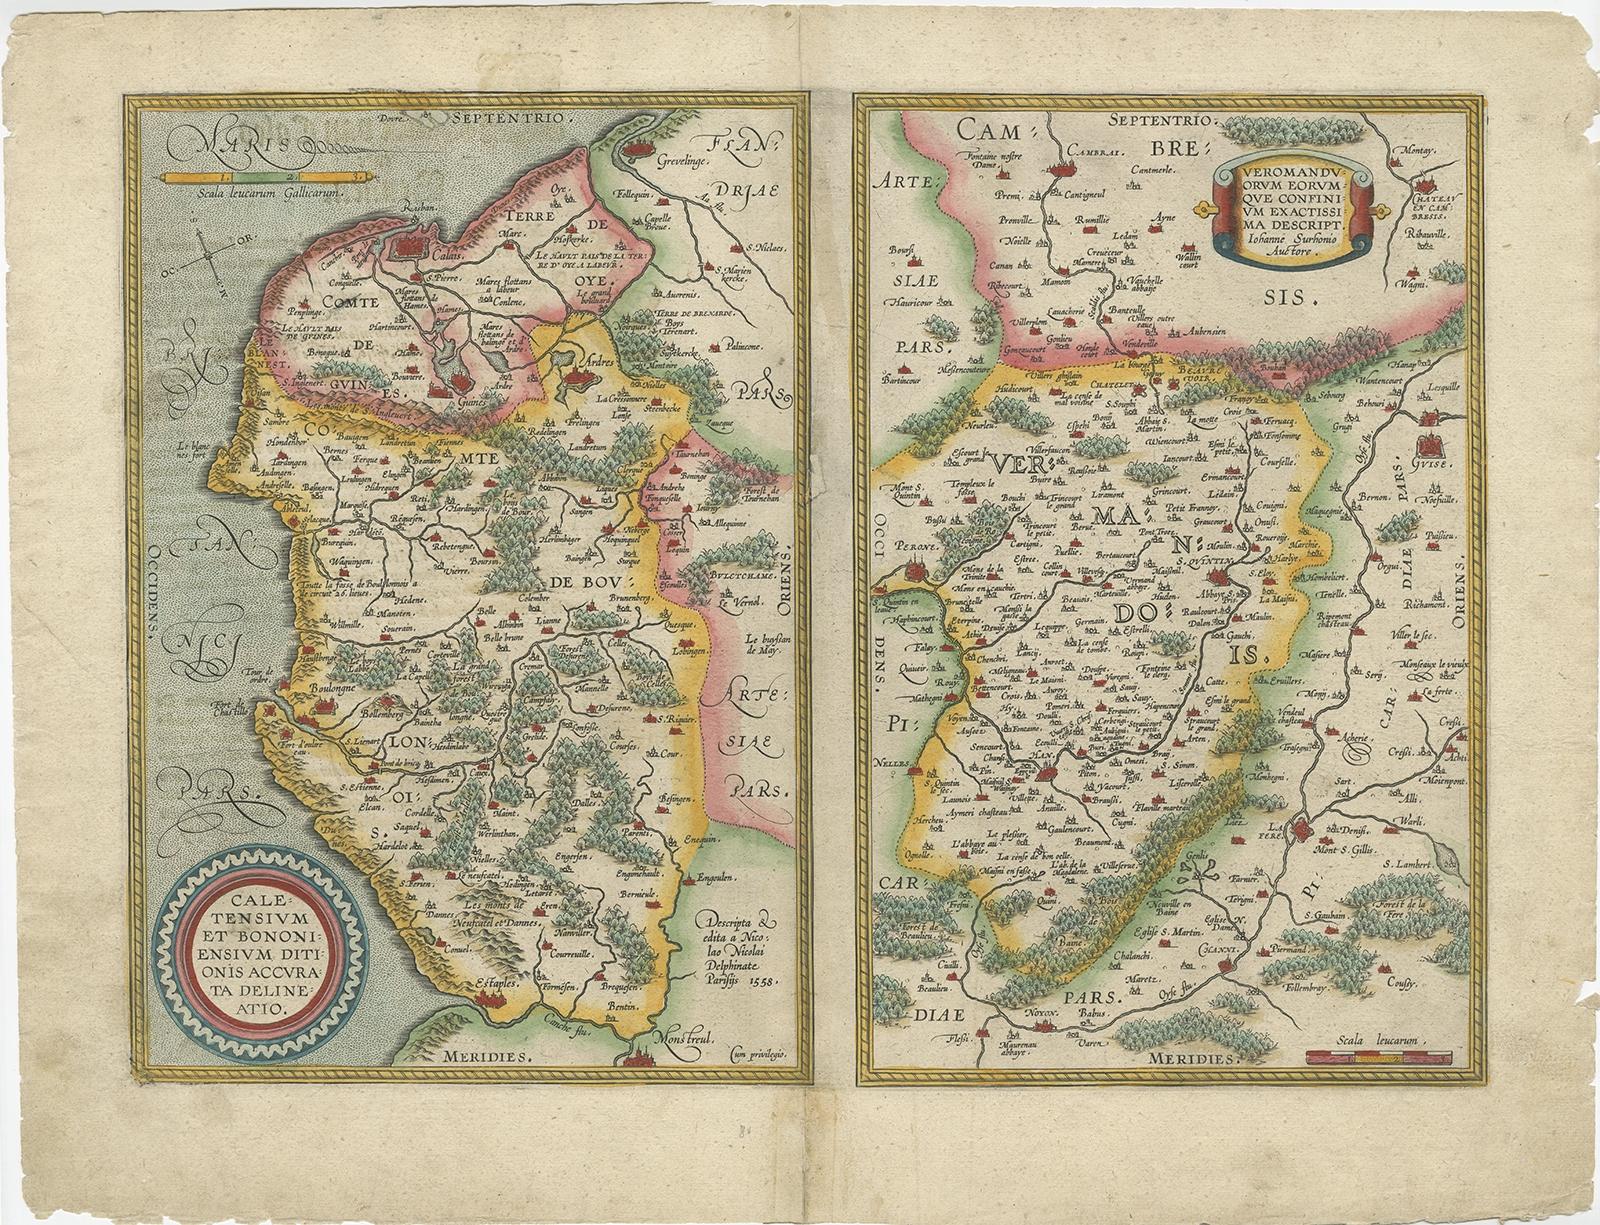 Antique map titled 'Caletensium et Bononiensium (..)'. 

Two detailed regional maps on one sheet. The first map shows Belgian and French Coastal region, from Estaples to Gruerlinge, including Calais and Boulogne. The second shows the region